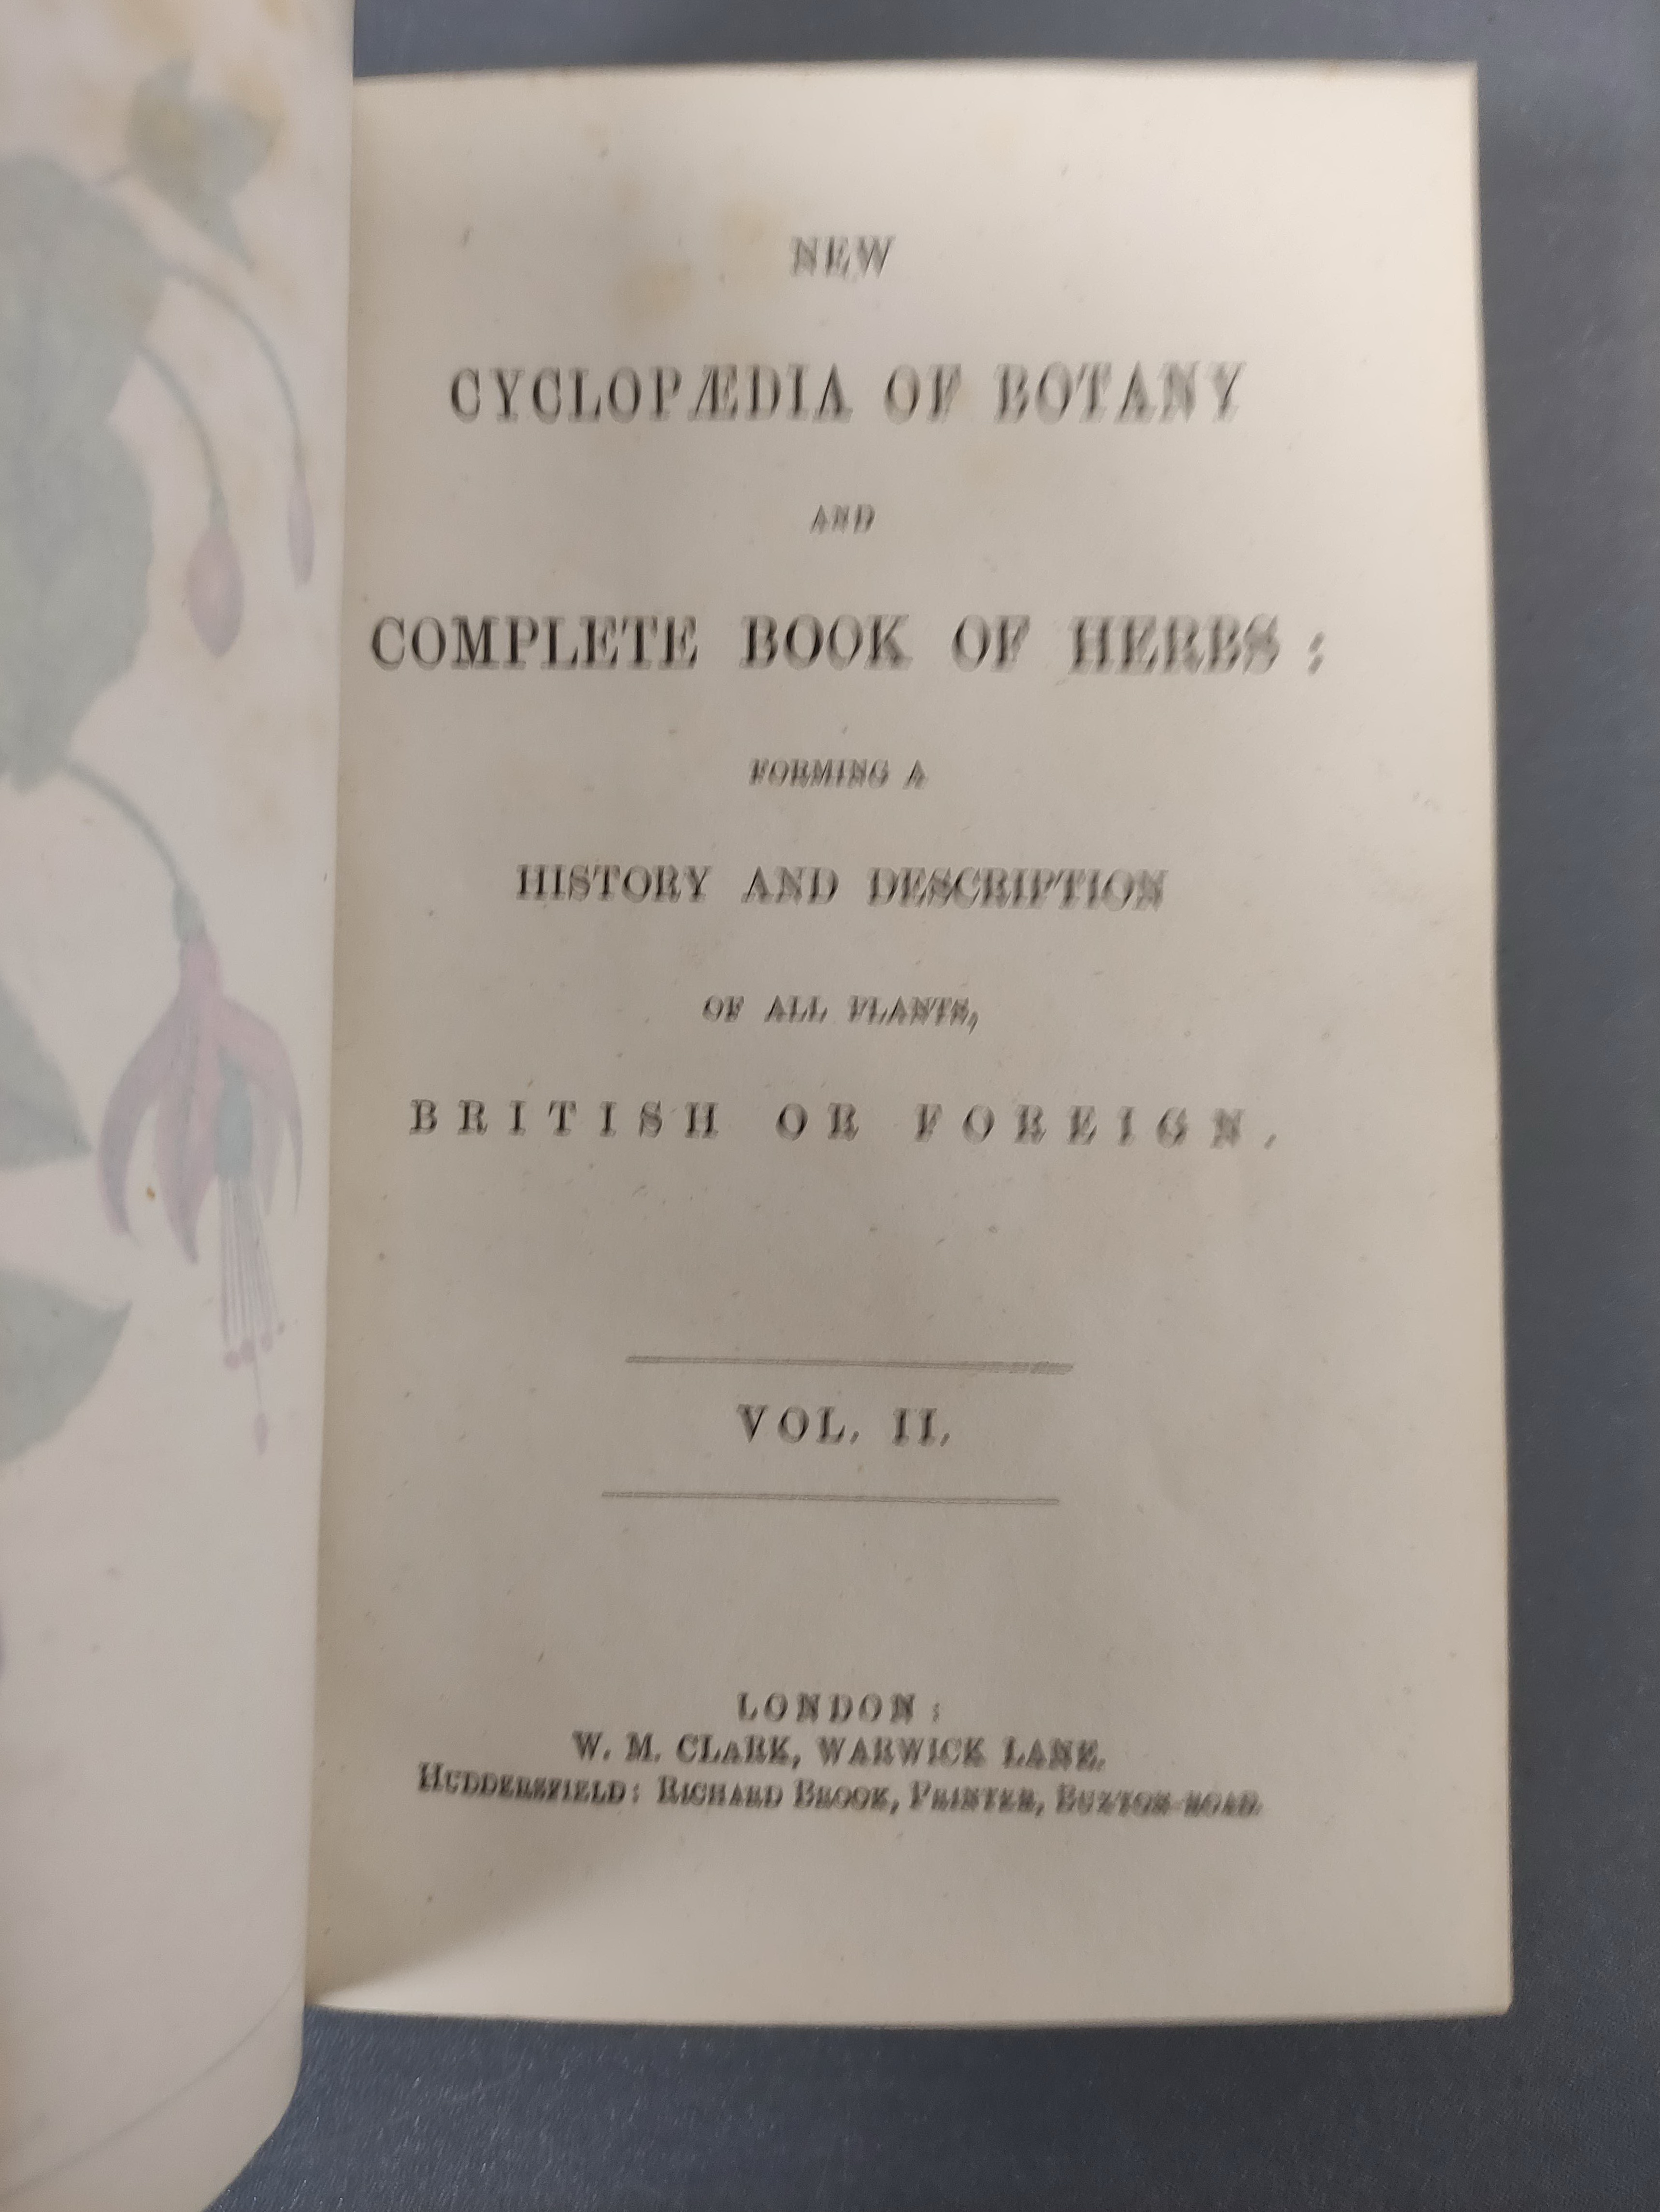 CLARK W. M. & BROOK R. (Pubs).  The Cyclopaedia of Botany or A Correct History & Description of - Image 8 of 12